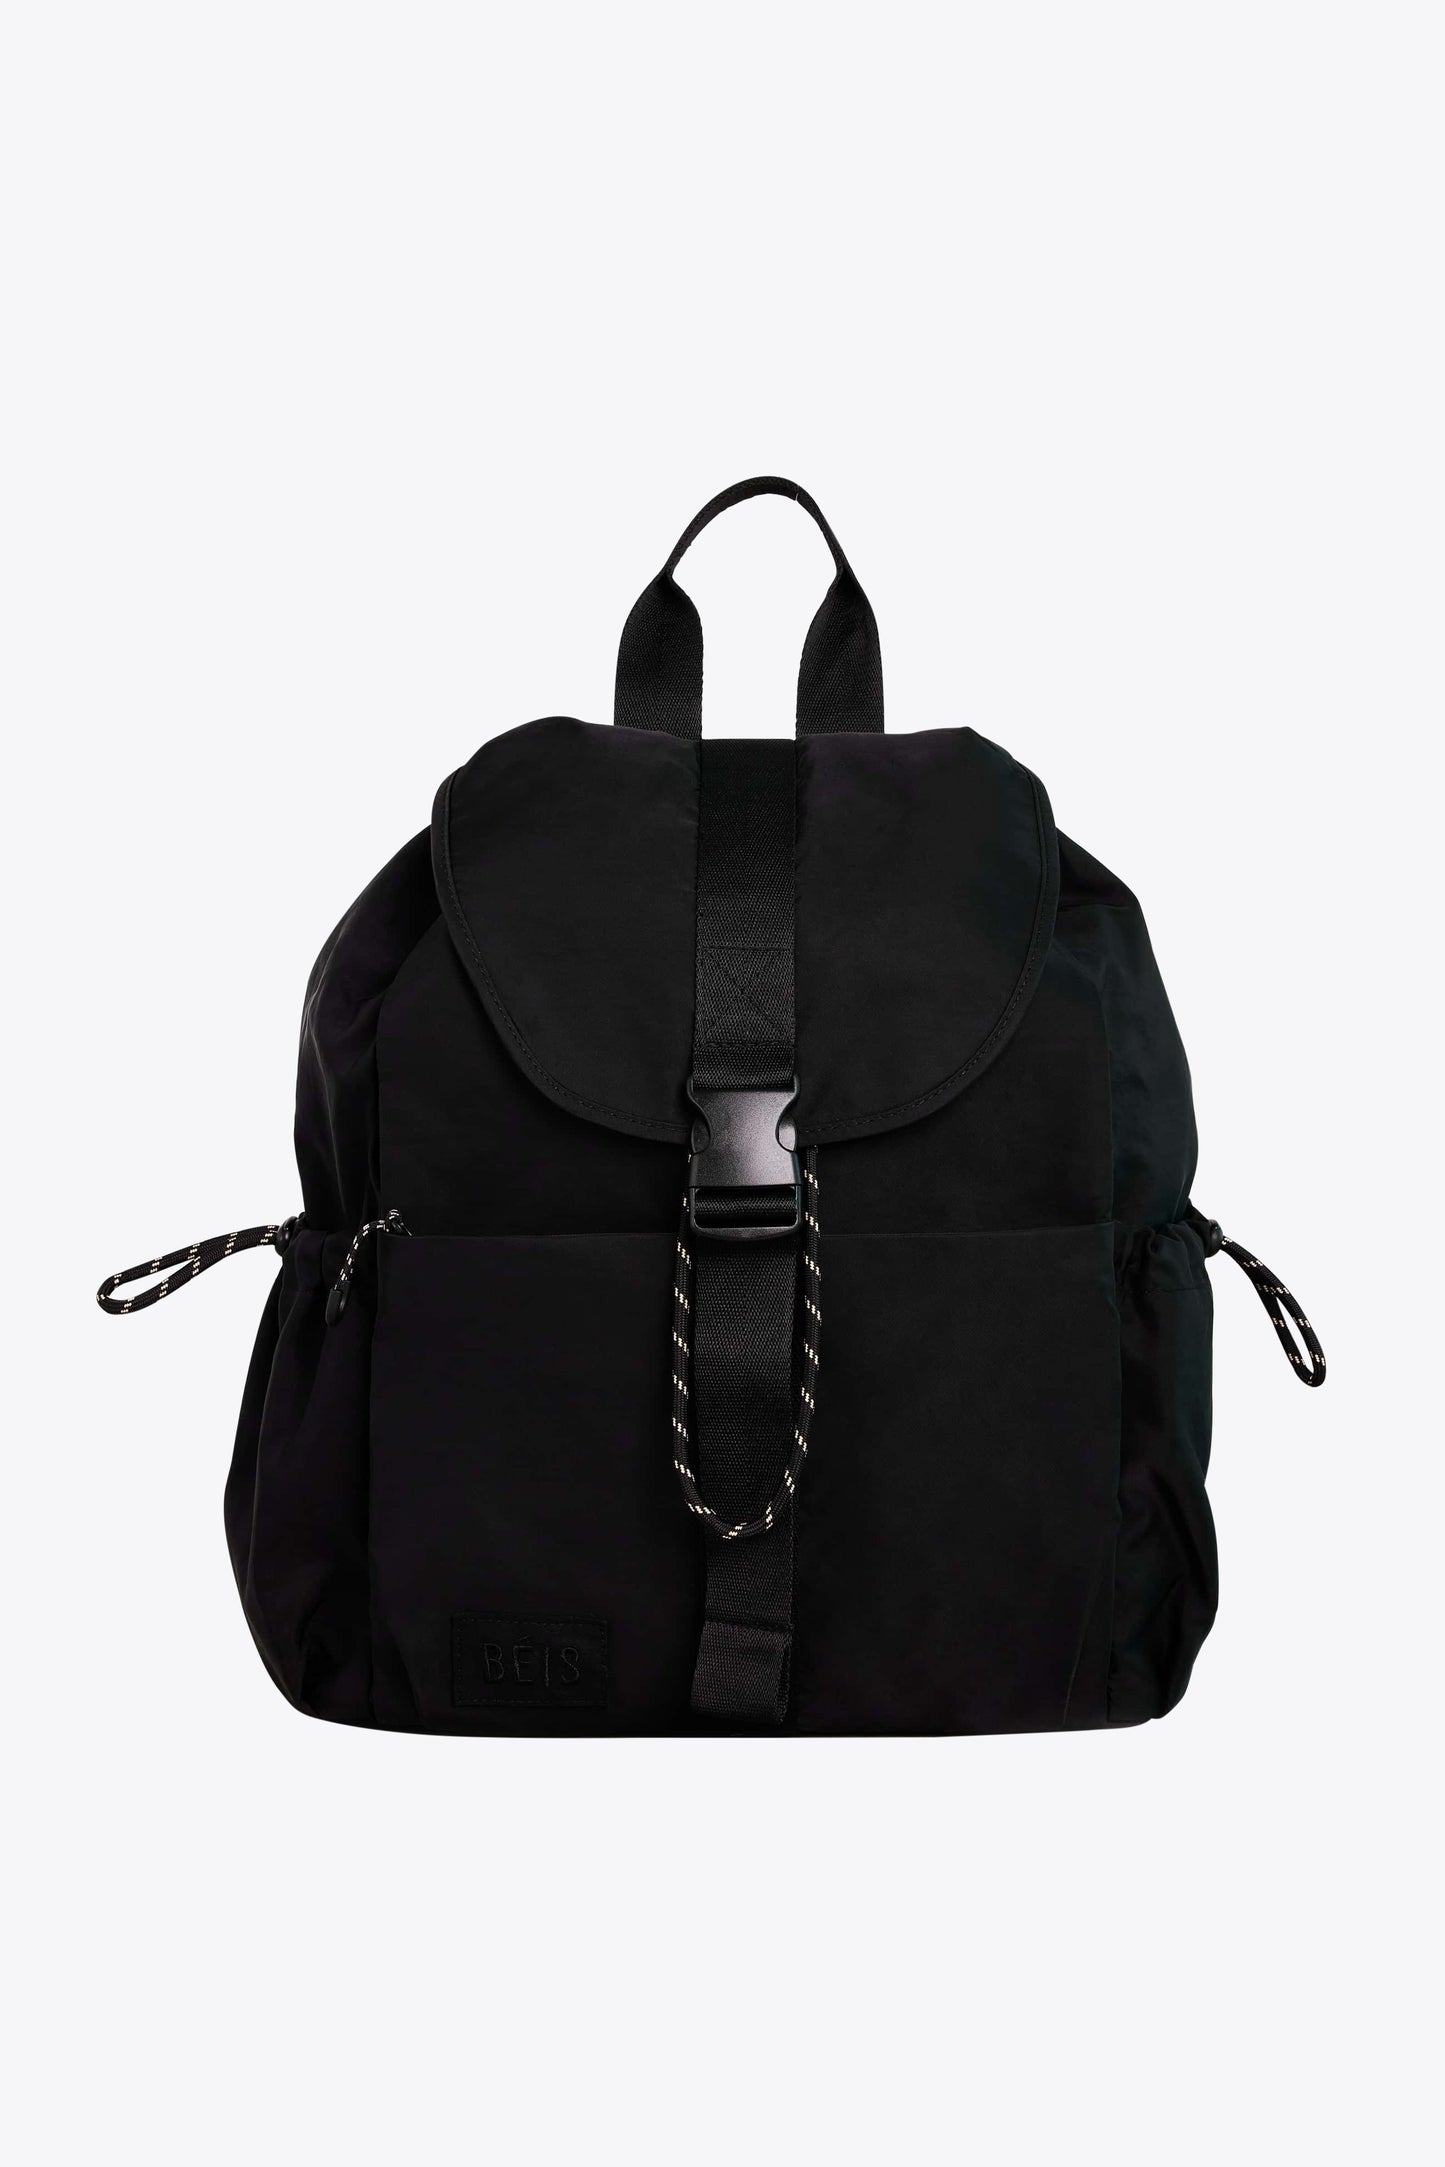 The Sport Backpack in Black